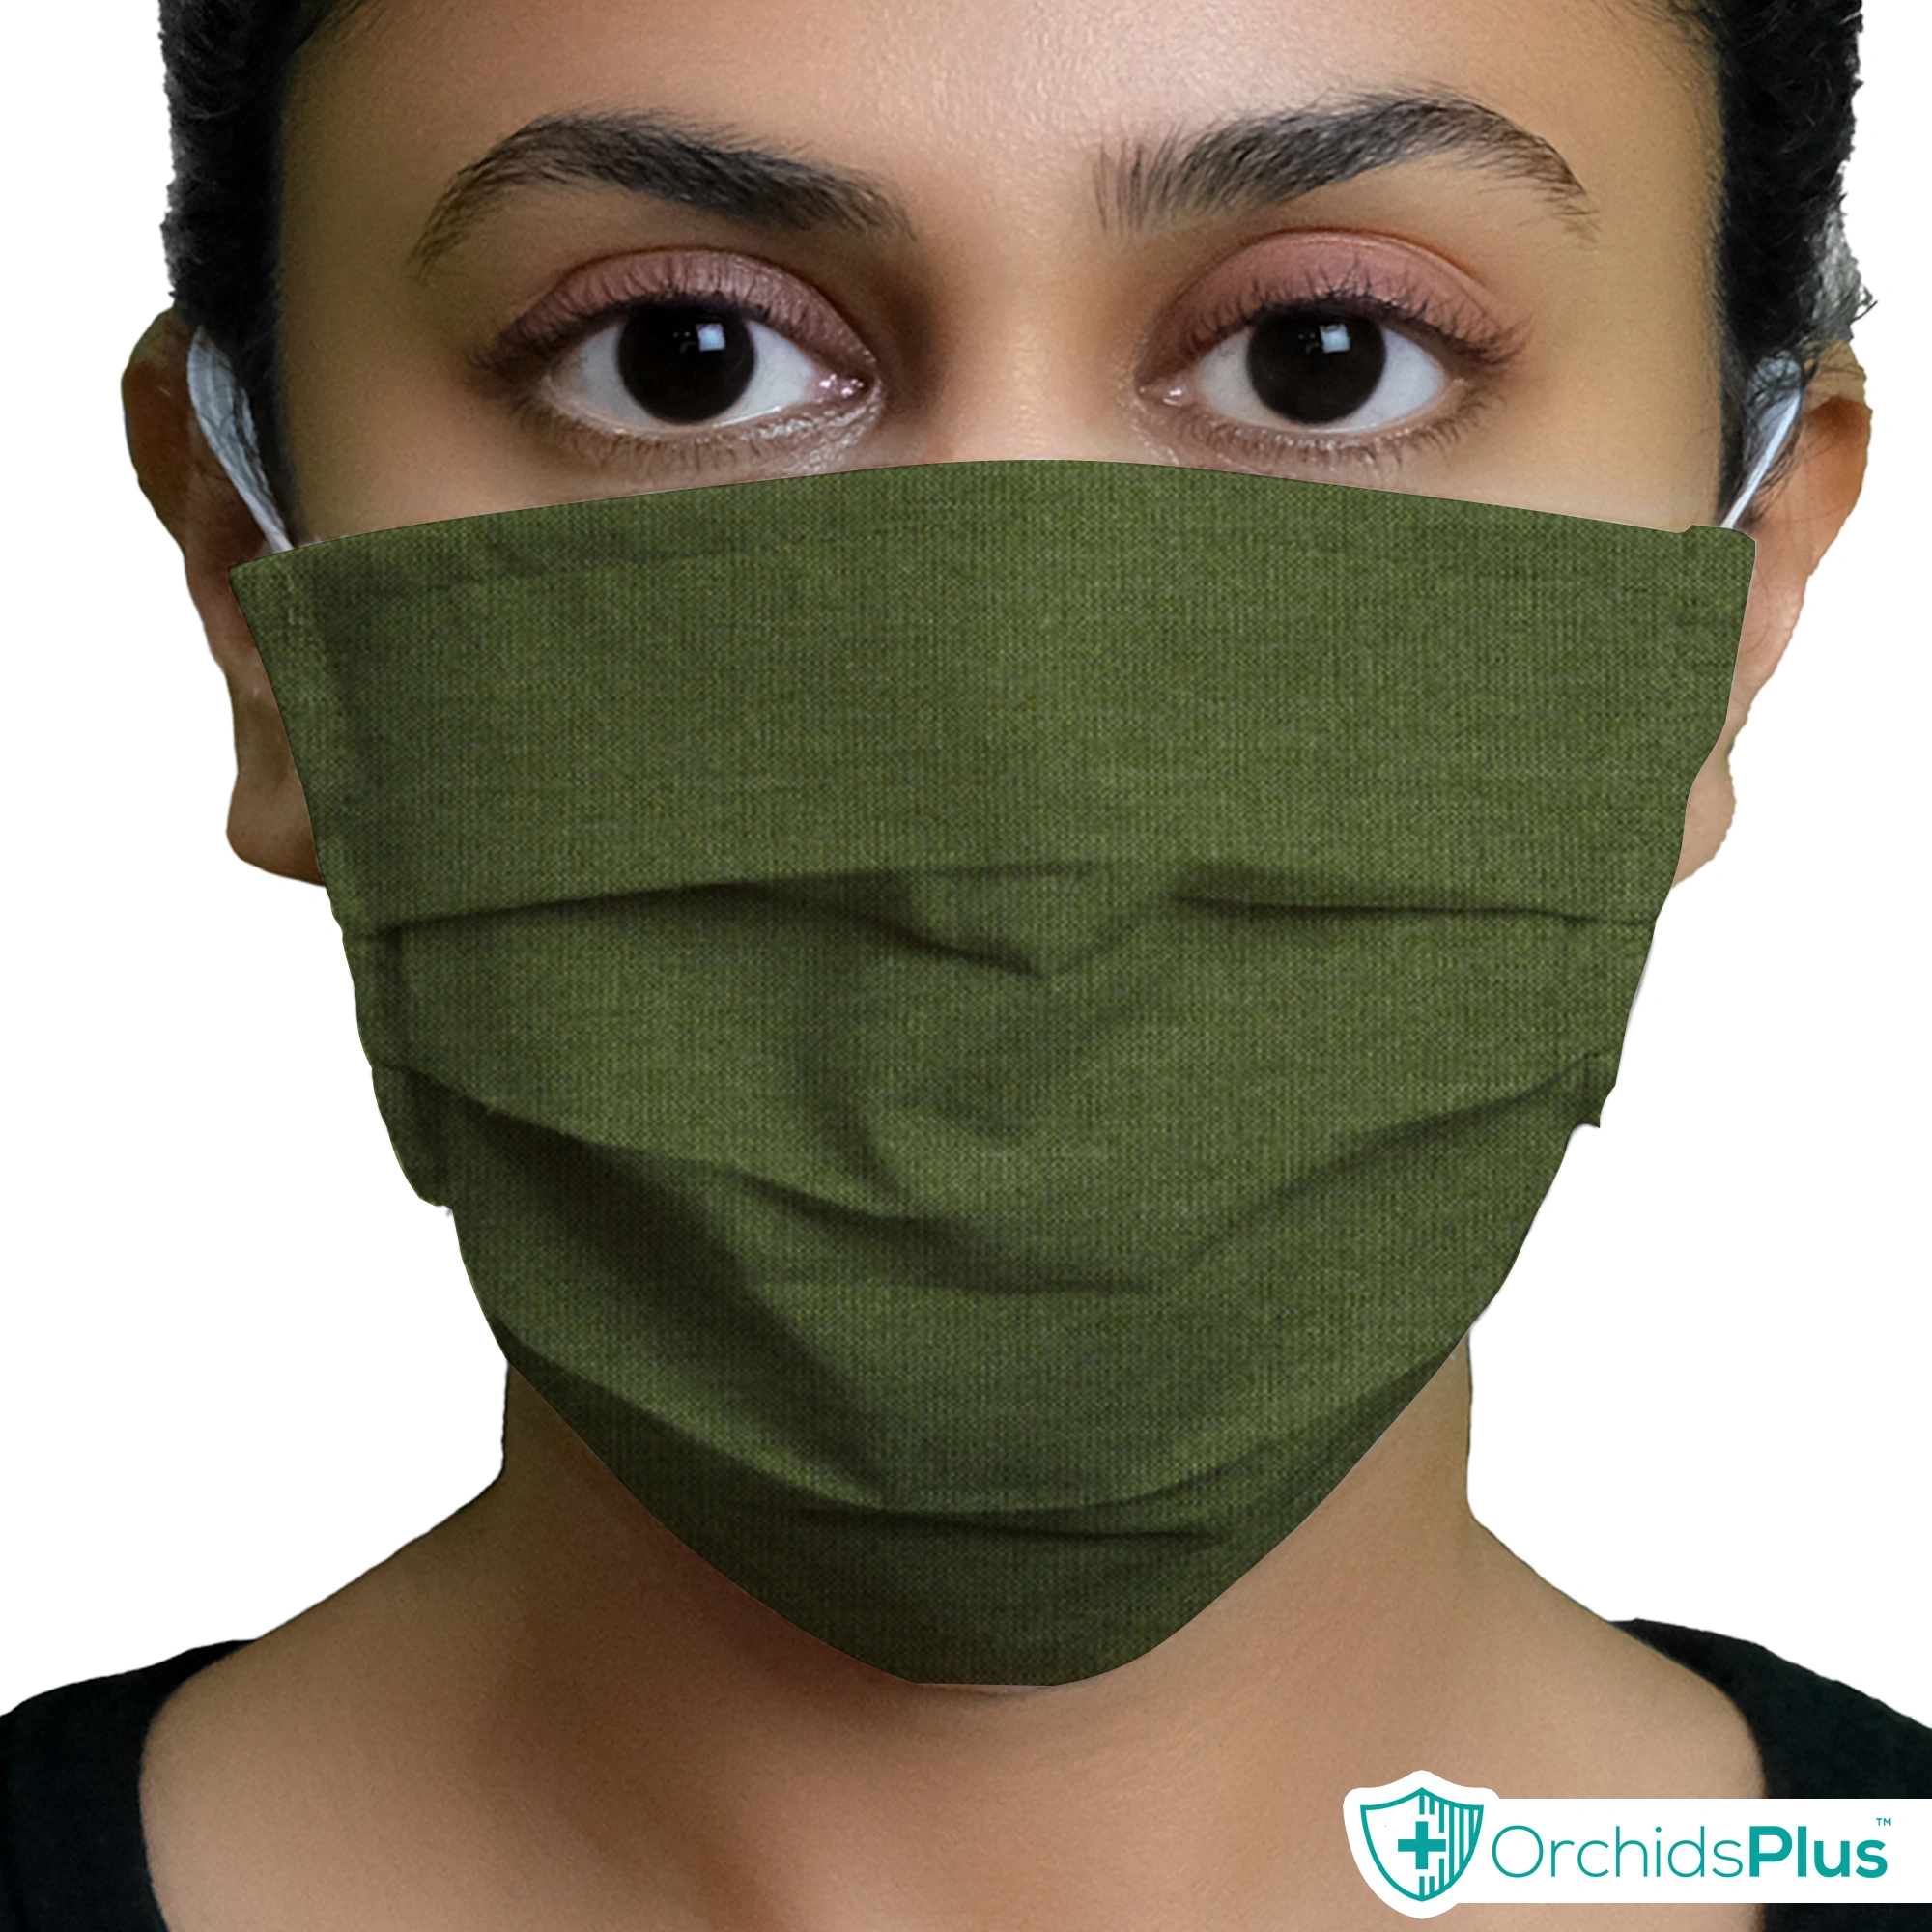 OrchidsPlus Pro Face Mask | 2+ Layer | Washable | Reusable | Active Protection - Green-5-2